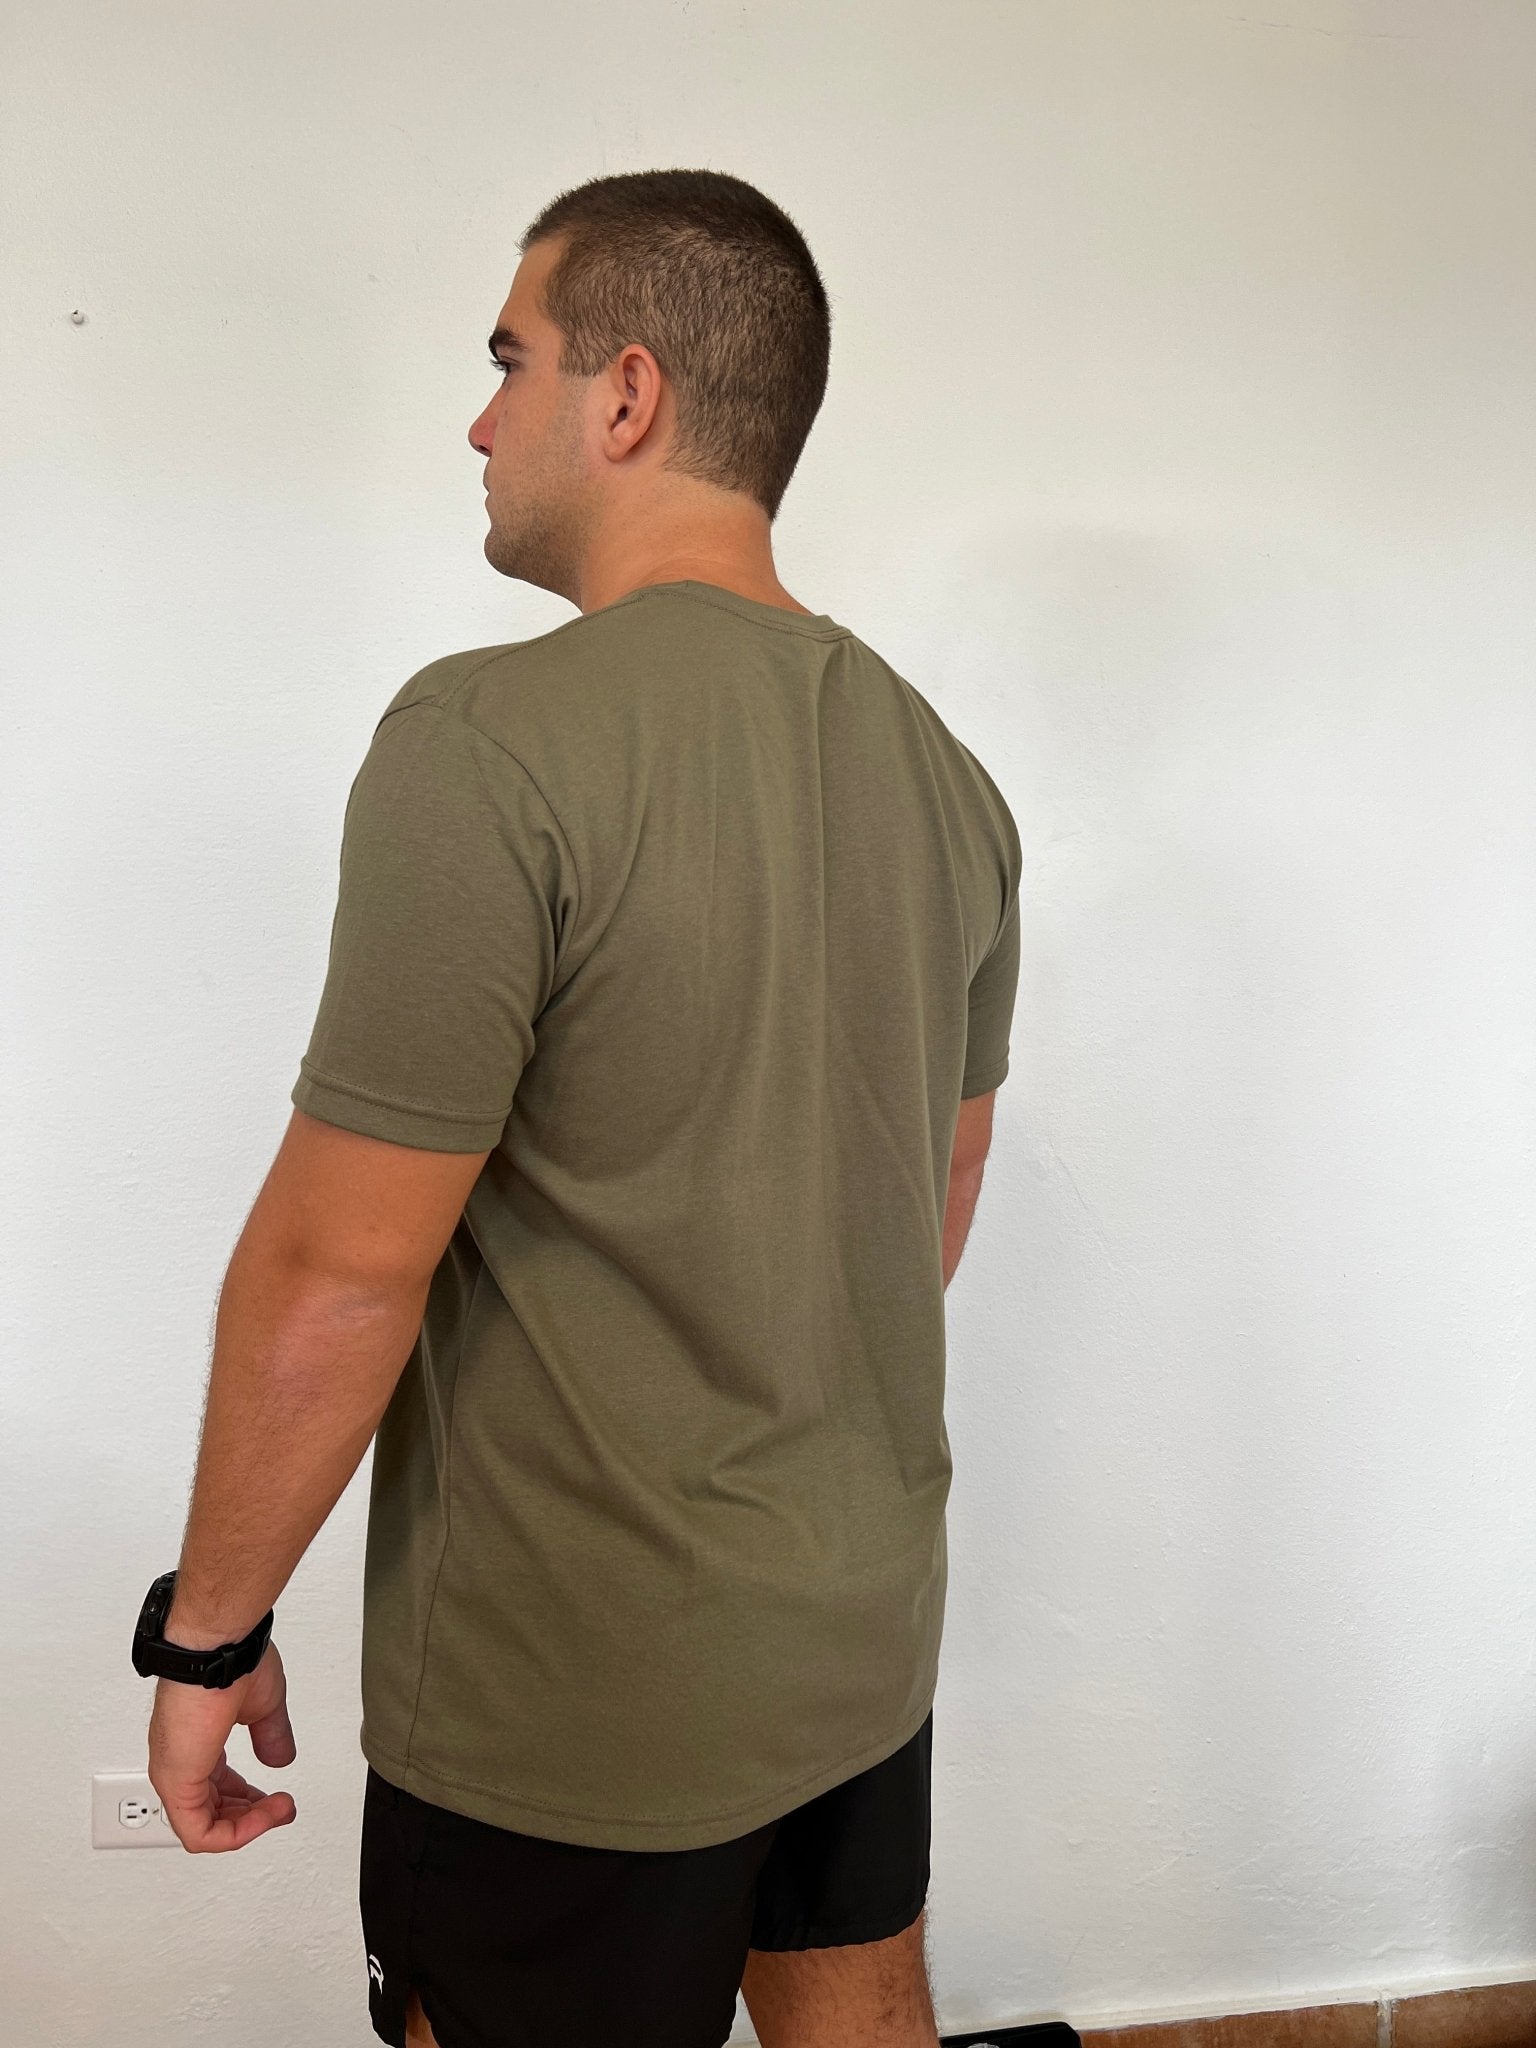 RESILIENT Comfort Style Shirt- Military Green - Resilient Active